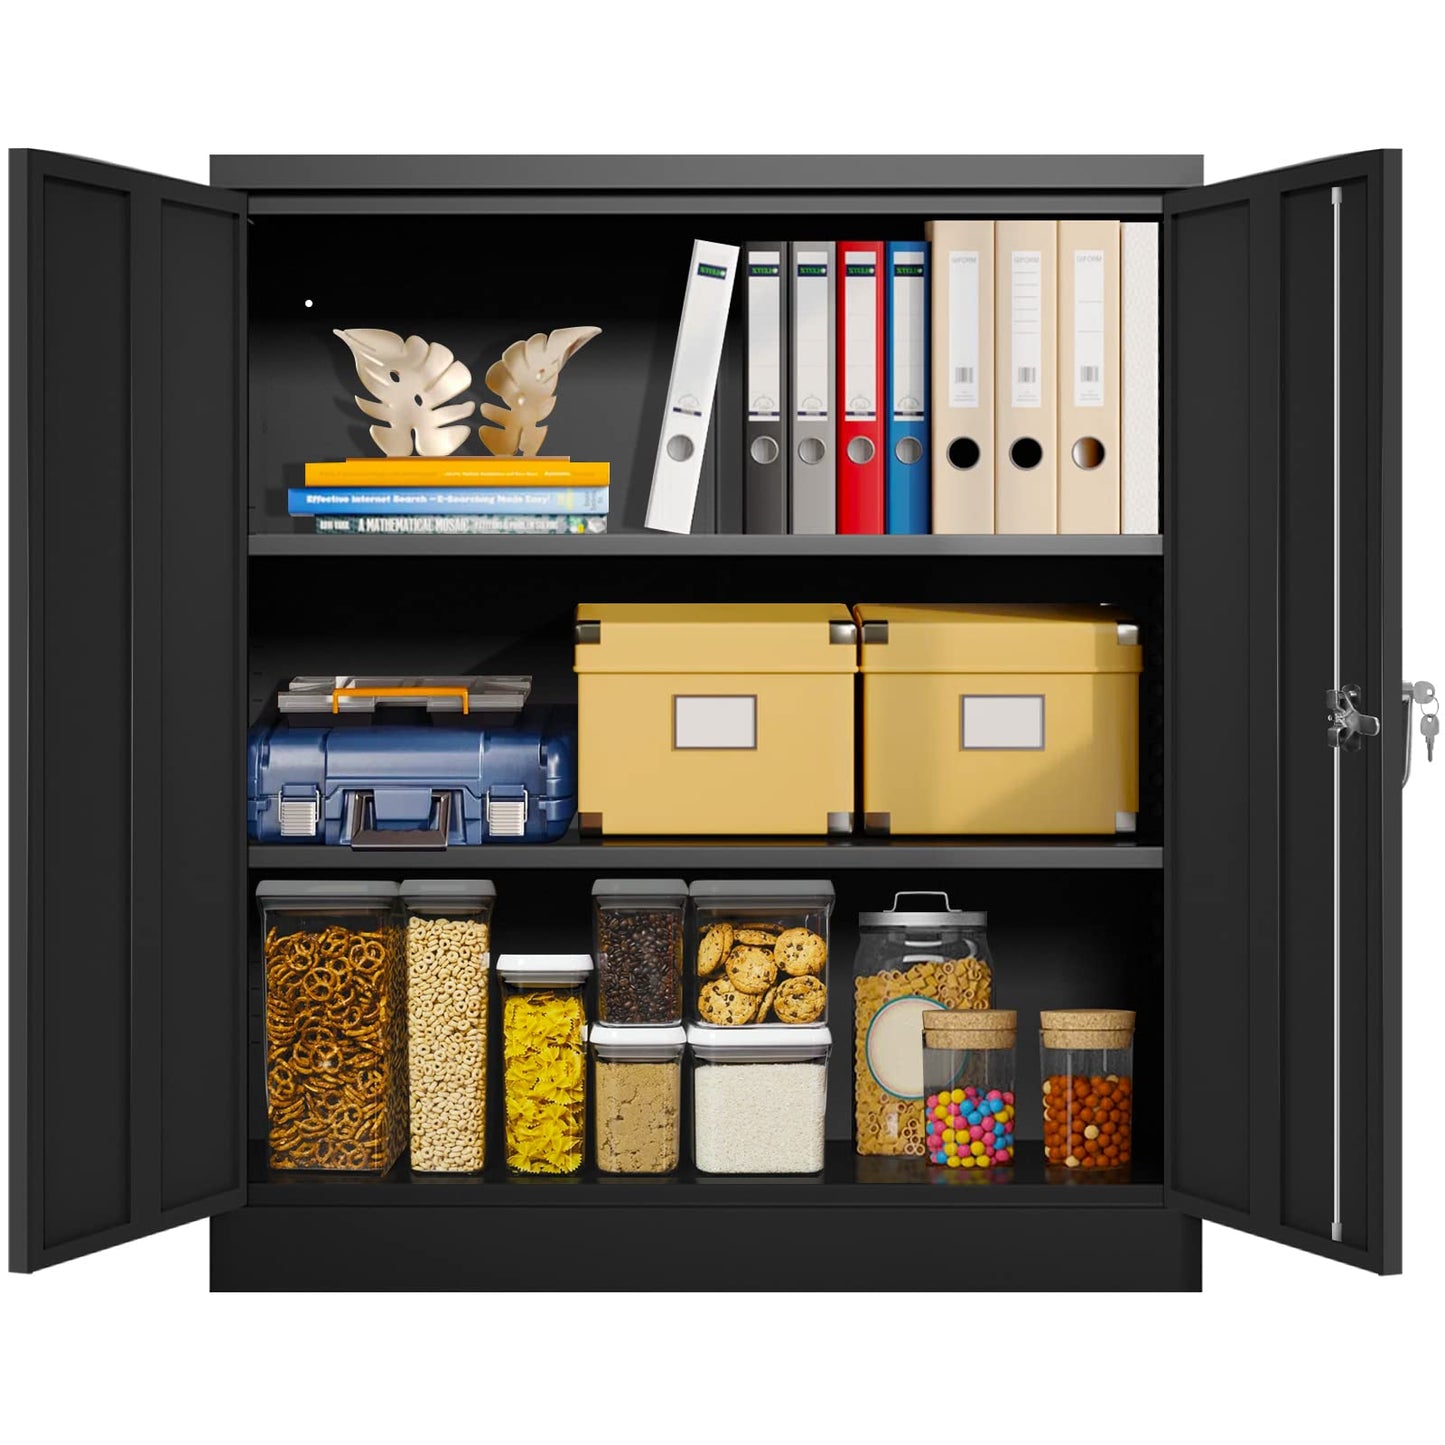 Greenvelly Metal Storage Cabinet, 42”Locking Storage Cabinet with Doors and Shelves, Black Lockable Storage Cabinets for Office, Utility Locker